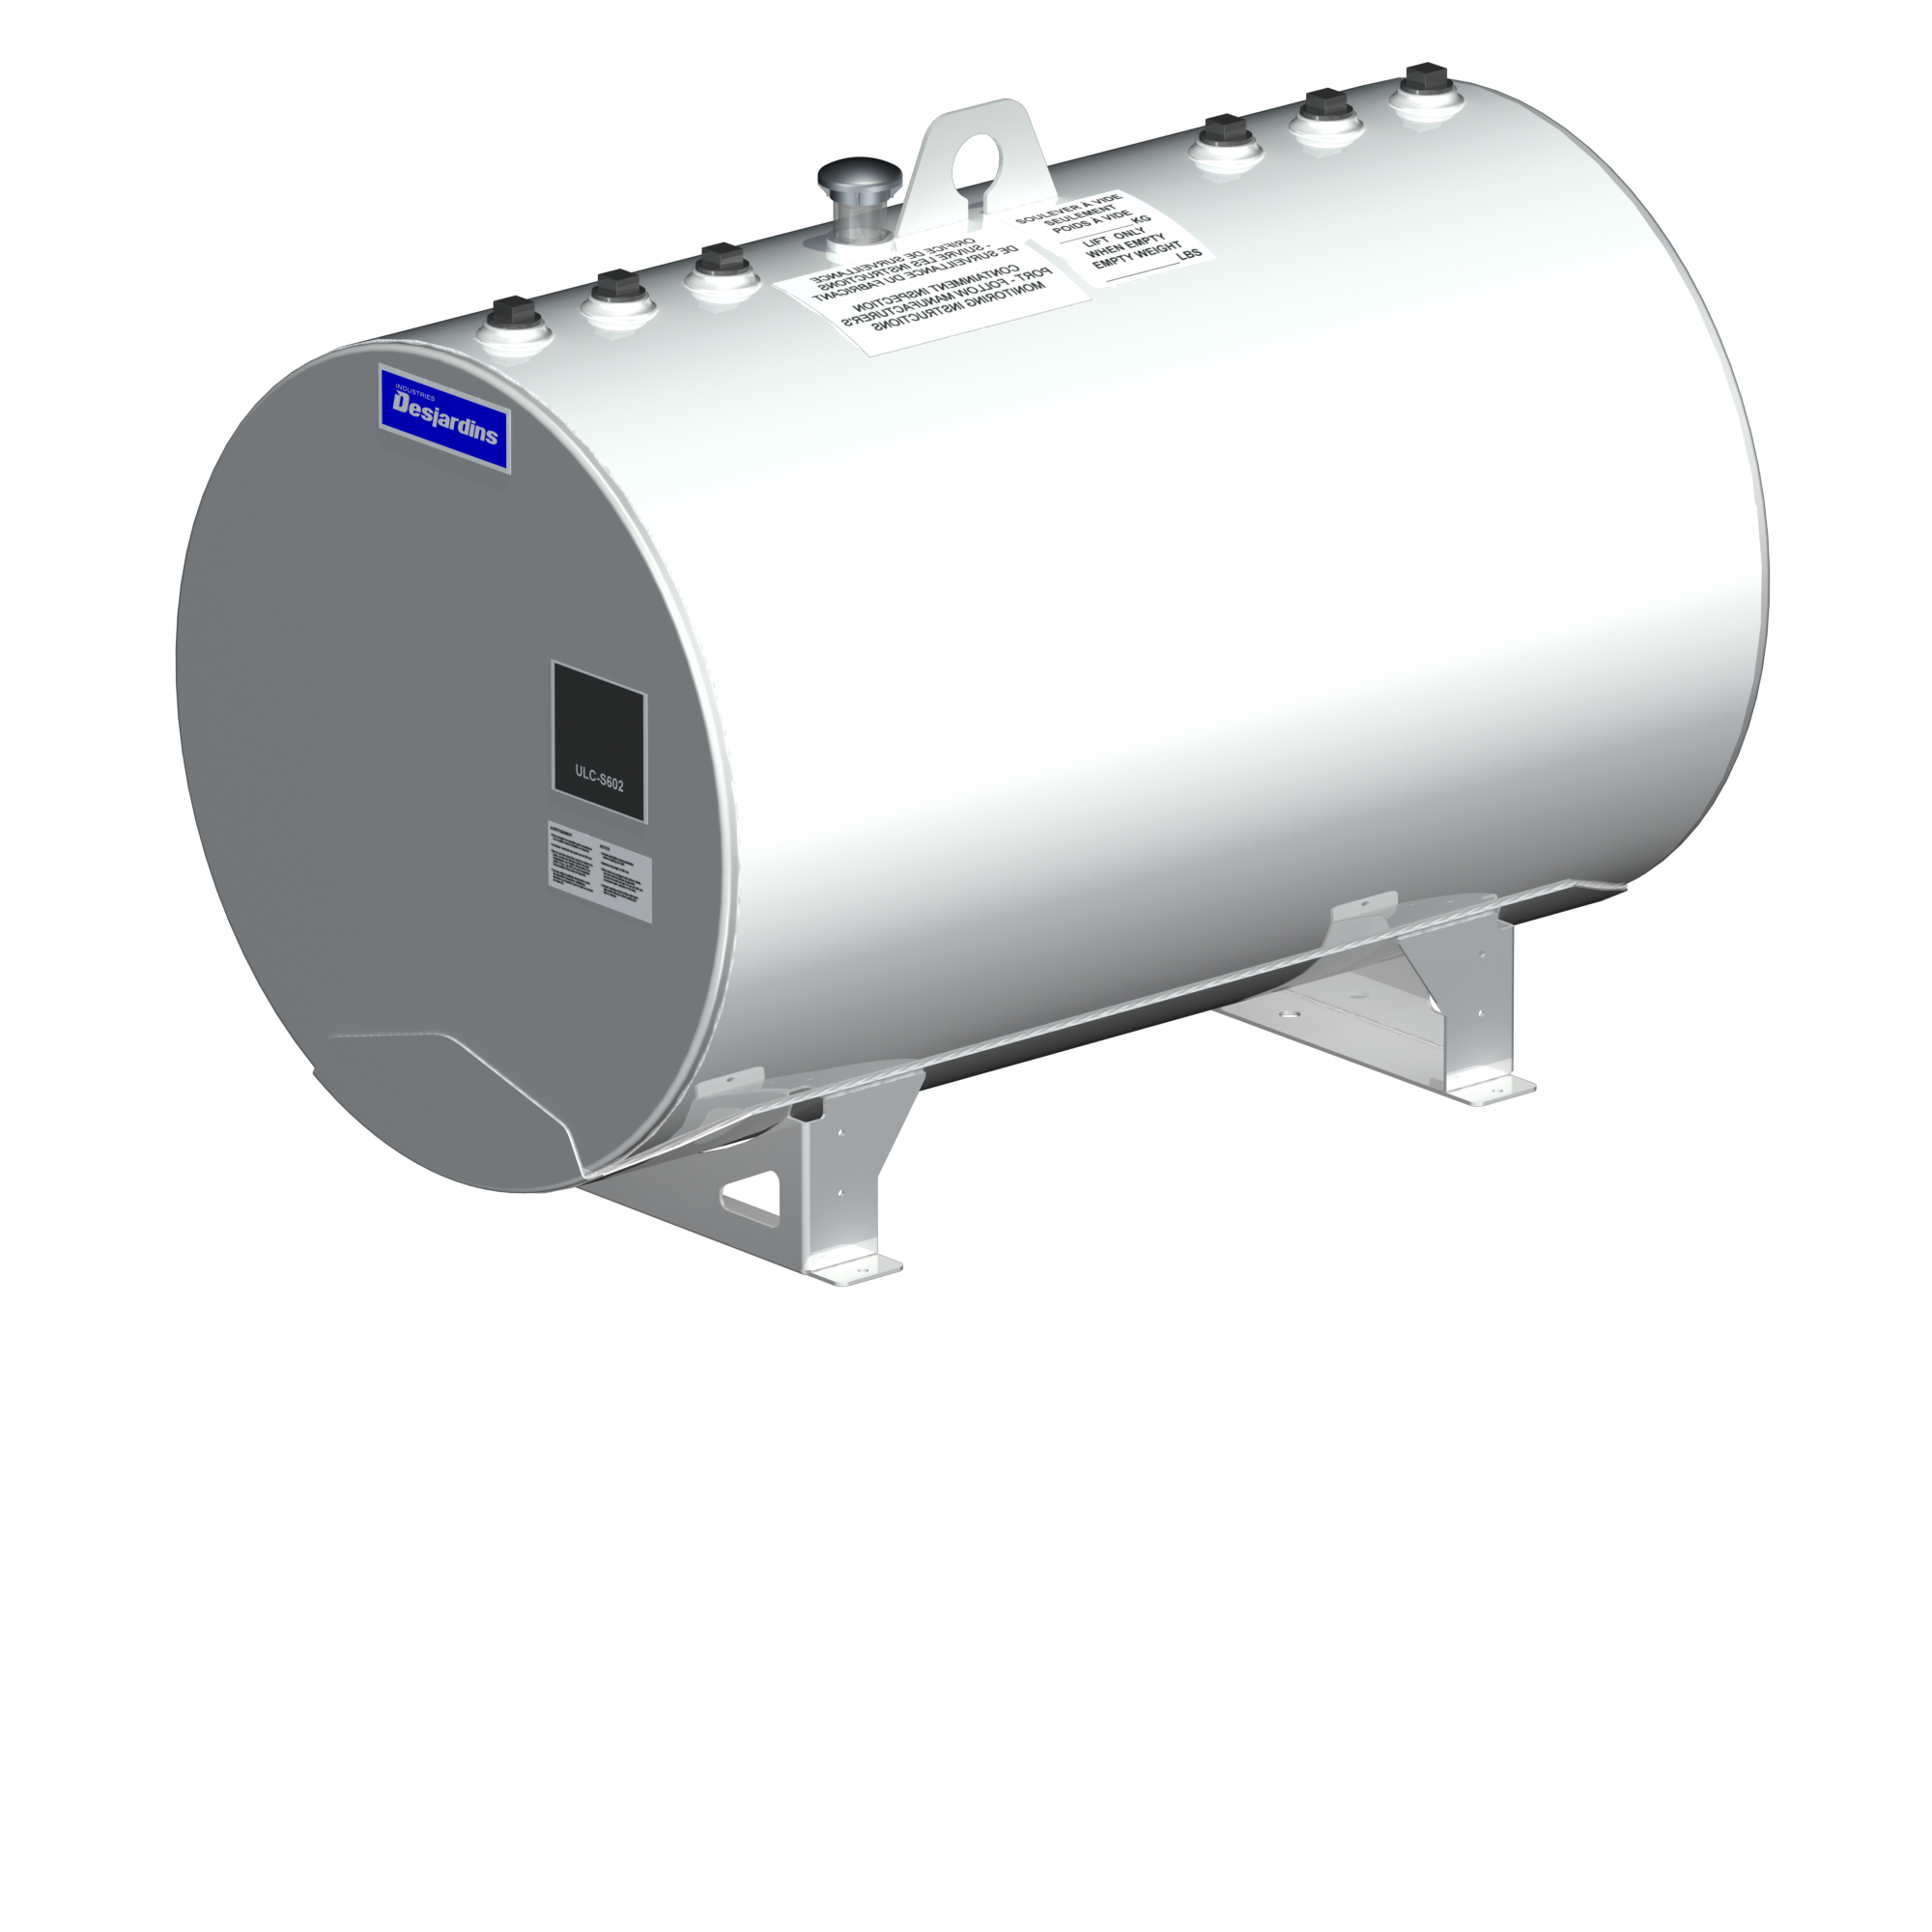 Aboveground steel tanks for fuel oil and lubricating oil